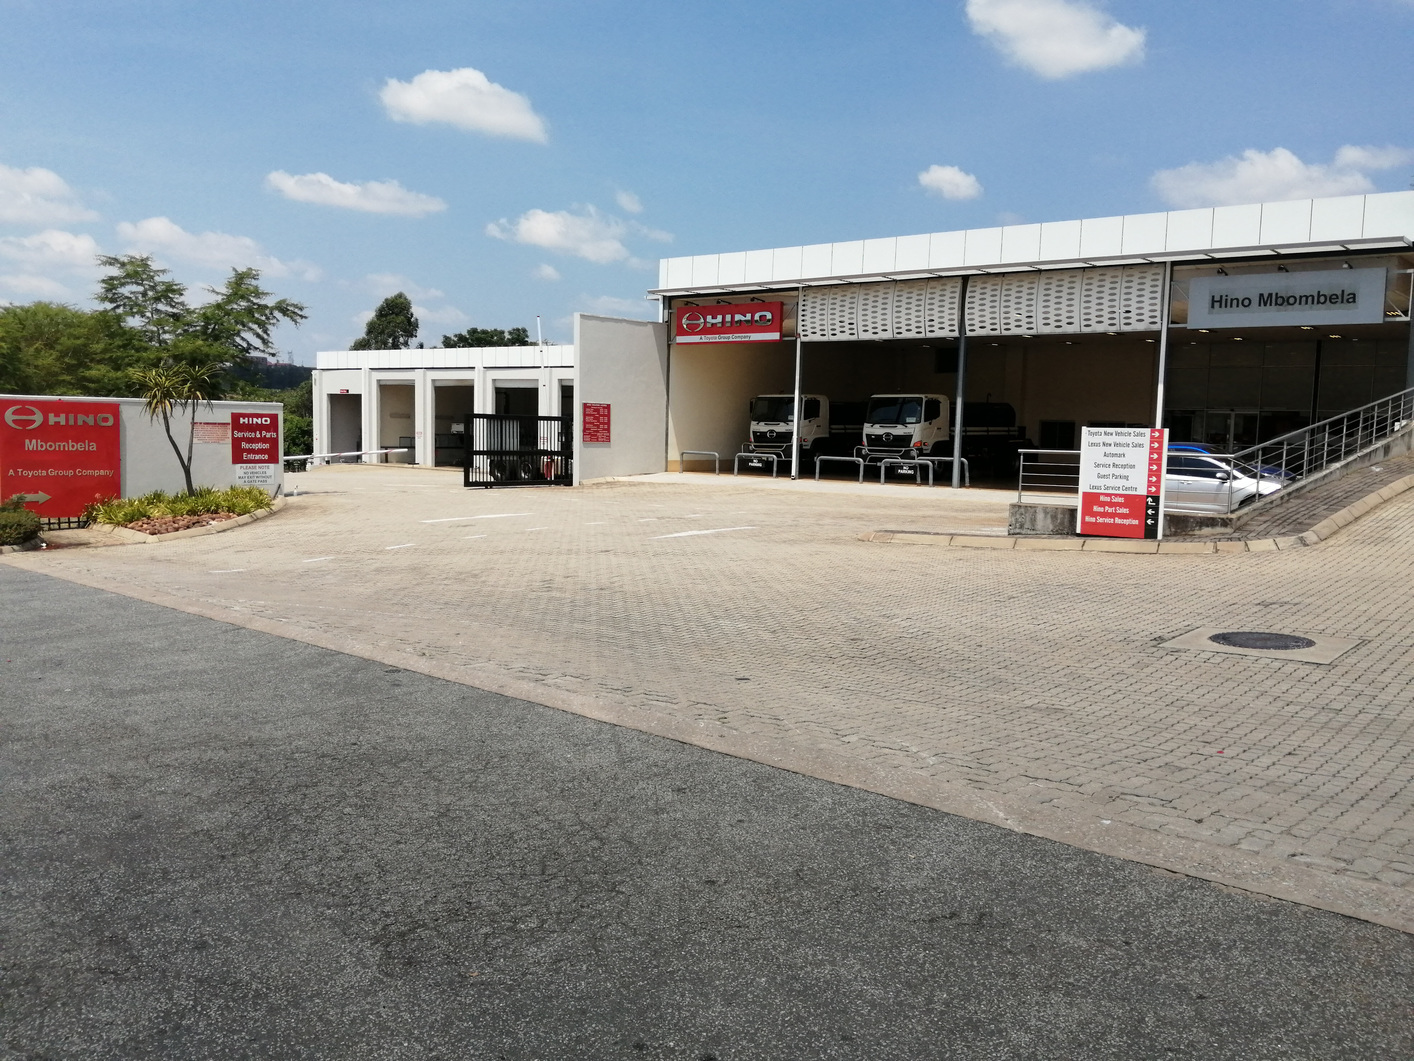 Toy Nelsp5 Hino Mbombela is an important division of the Toyota dealership